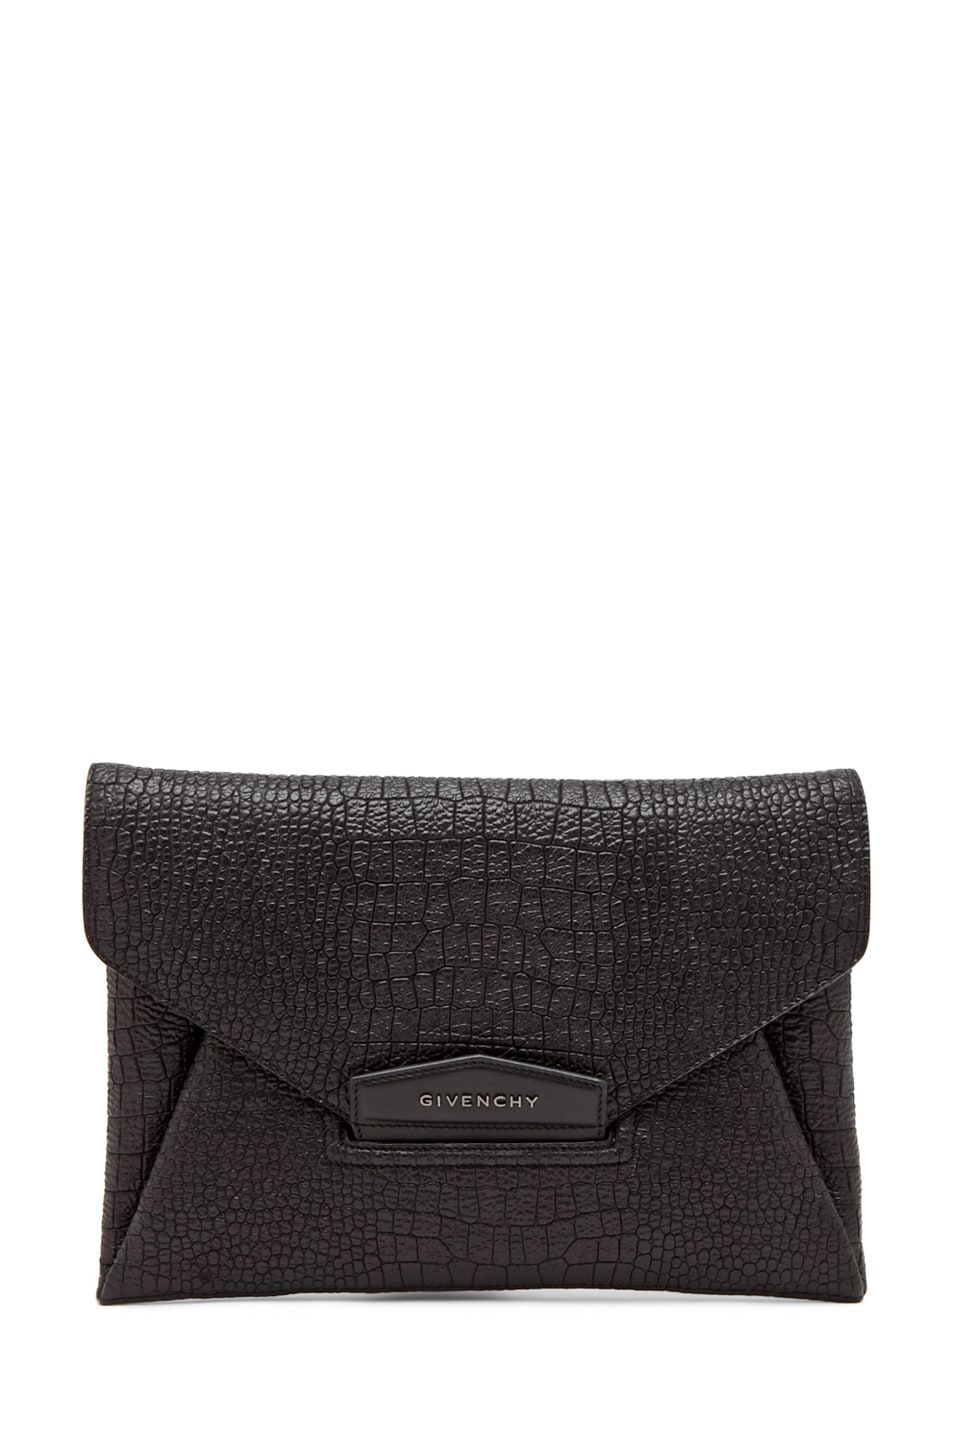 Image 1 of Givenchy Envelope Clutch in Black